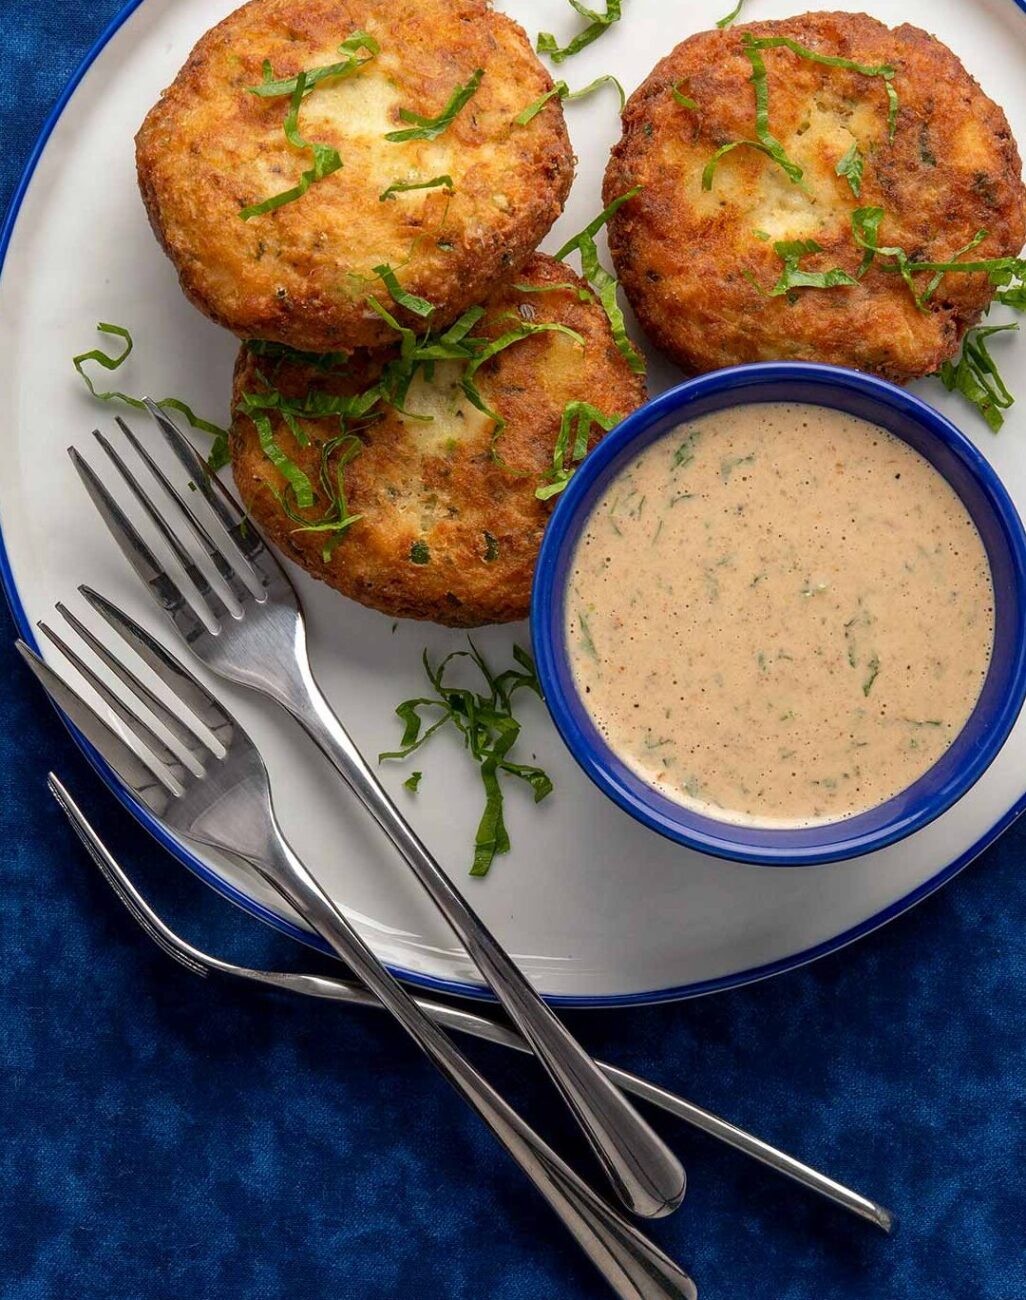 Puget Sound Corn Fritters